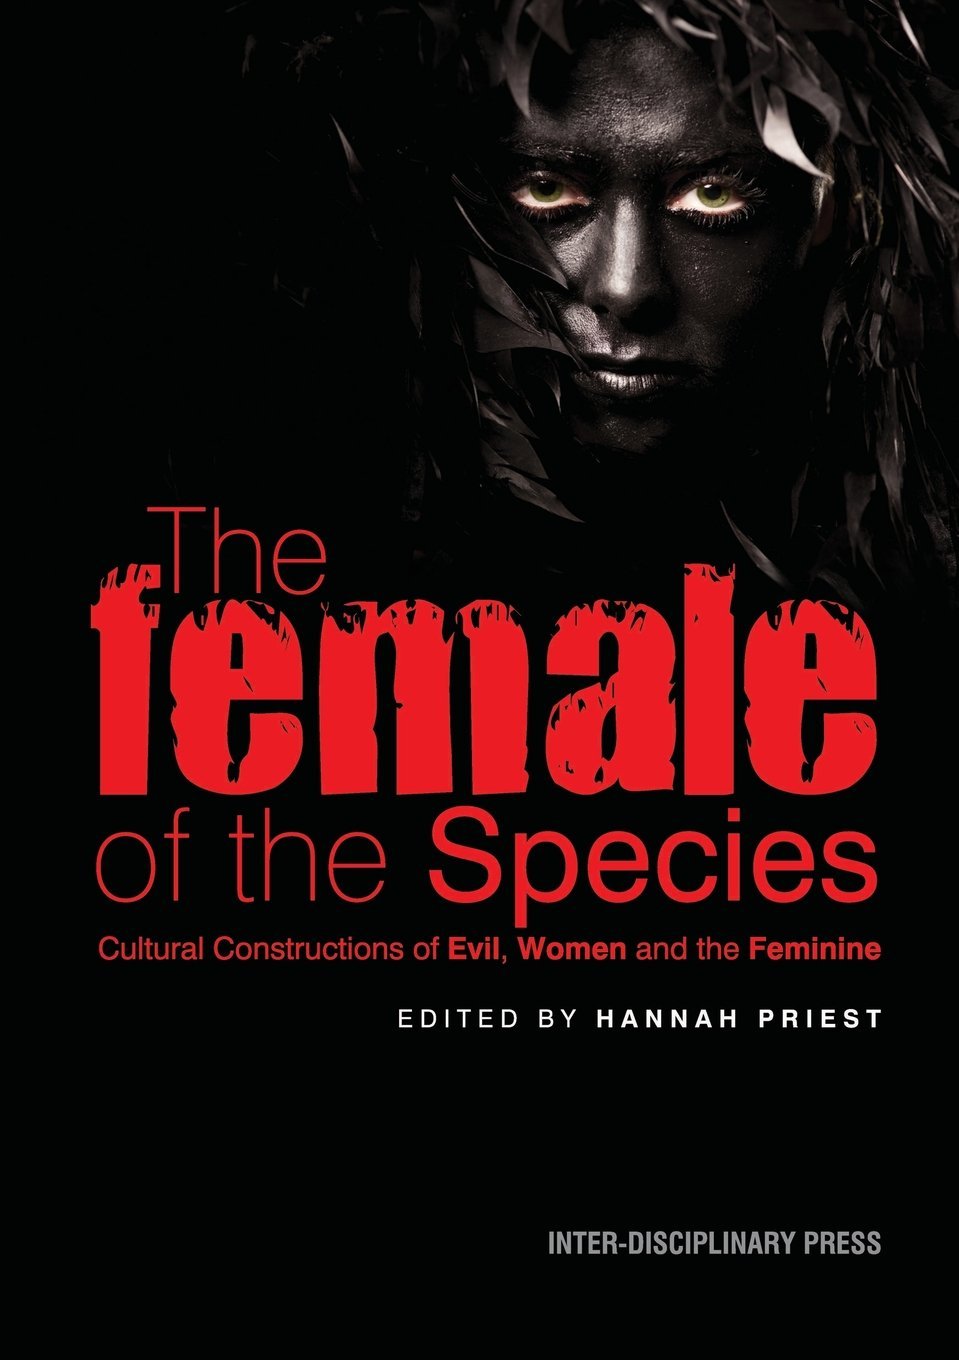 Female of the Species